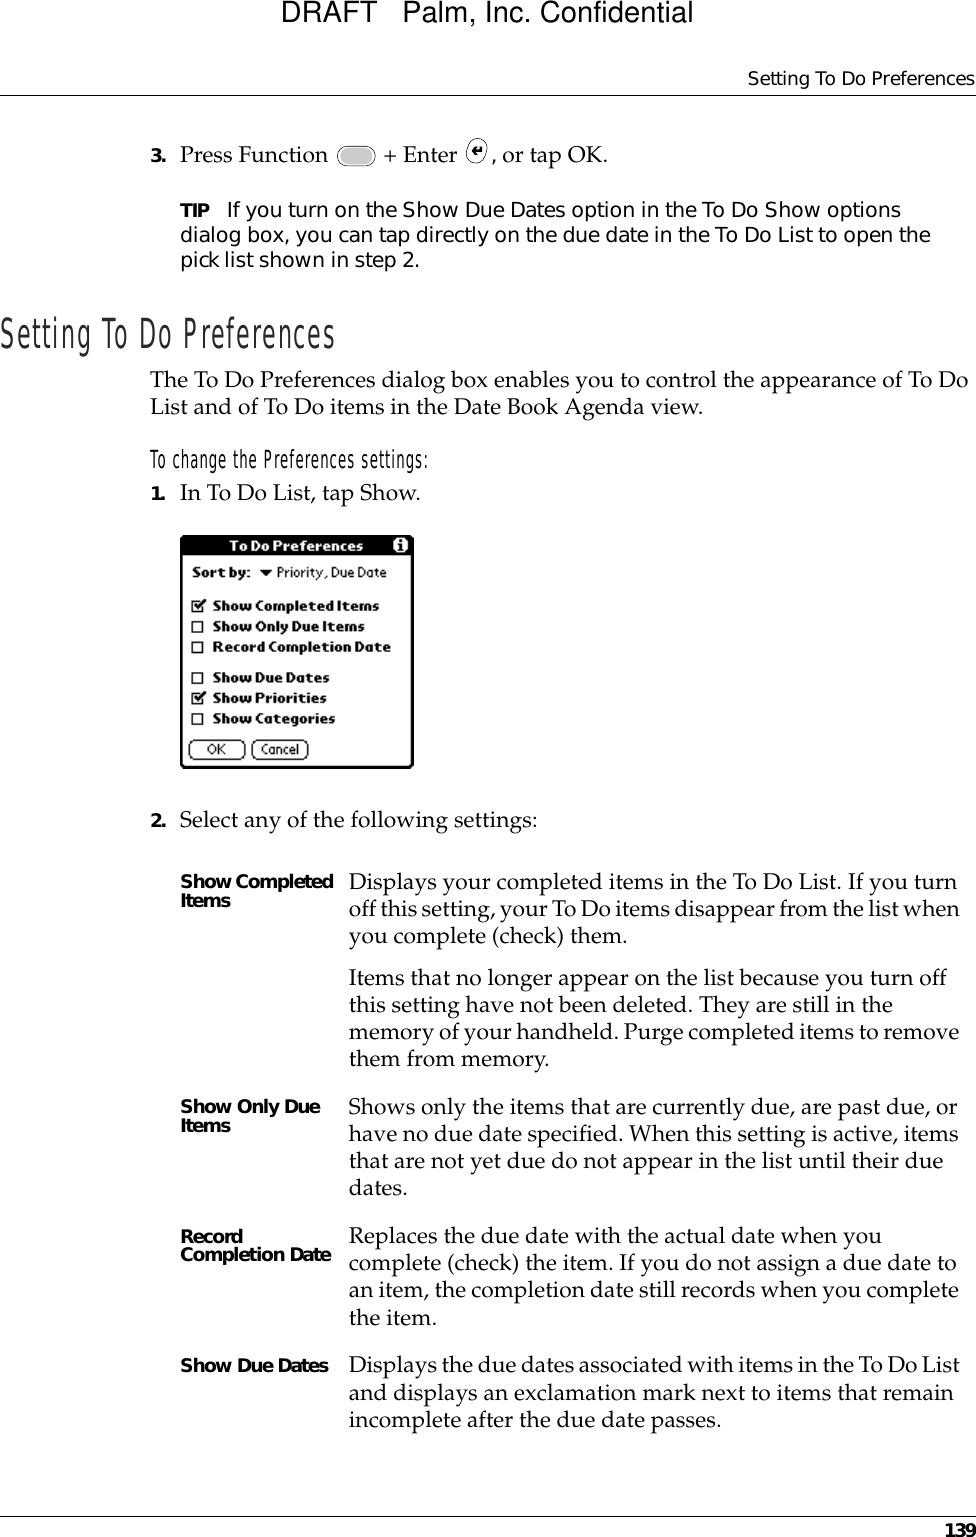 Setting To Do Preferences1393. Press Function   + Enter  , or tap OK.TIP If you turn on the Show Due Dates option in the To Do Show options dialog box, you can tap directly on the due date in the To Do List to open the pick list shown in step 2. Setting To Do PreferencesThe To Do Preferences dialog box enables you to control the appearance of To Do List and of To Do items in the Date Book Agenda view.To change the Preferences settings:1. In To Do List, tap Show.2. Select any of the following settings:Show Completed Items Displays your completed items in the To Do List. If you turn off this setting, your To Do items disappear from the list when you complete (check) them.Items that no longer appear on the list because you turn off this setting have not been deleted. They are still in the memory of your handheld. Purge completed items to remove them from memory.Show Only Due Items Shows only the items that are currently due, are past due, or have no due date specified. When this setting is active, items that are not yet due do not appear in the list until their due dates.Record Completion Date Replaces the due date with the actual date when you complete (check) the item. If you do not assign a due date to an item, the completion date still records when you complete the item.Show Due Dates Displays the due dates associated with items in the To Do List and displays an exclamation mark next to items that remain incomplete after the due date passes.DRAFT   Palm, Inc. Confidential